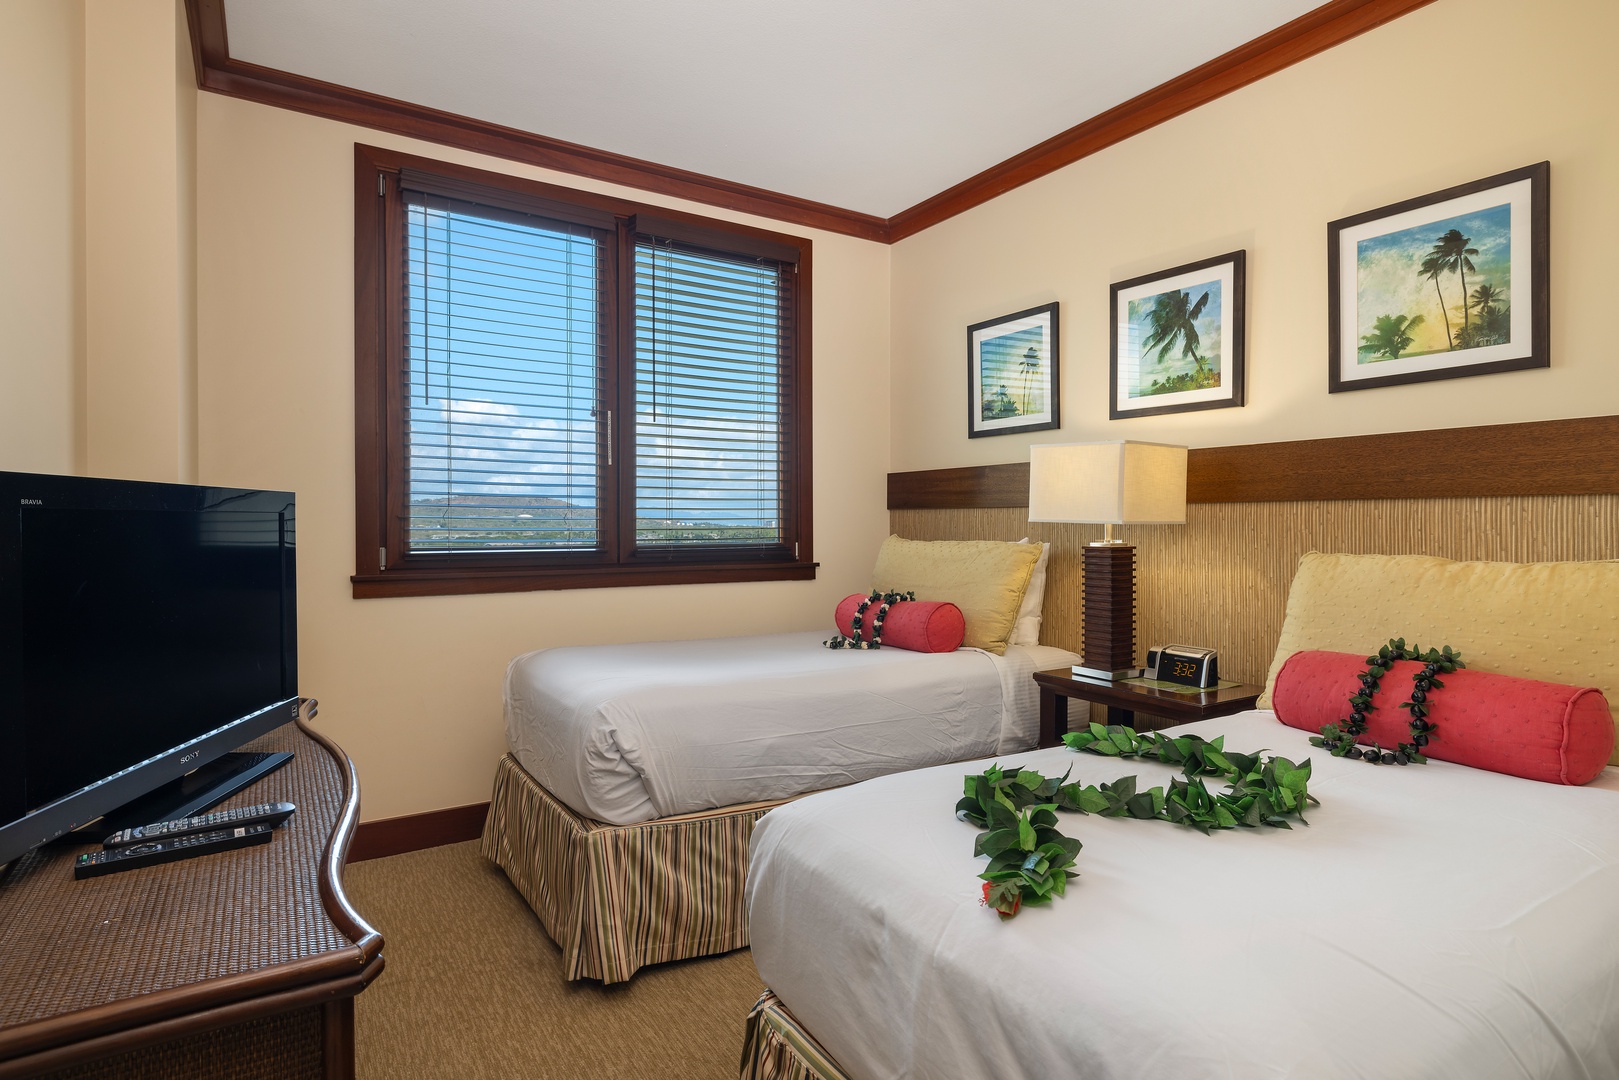 Kapolei Vacation Rentals, Ko Olina Beach Villas O1004 - The second guest bedroom boasts colorful twin beds and island art.